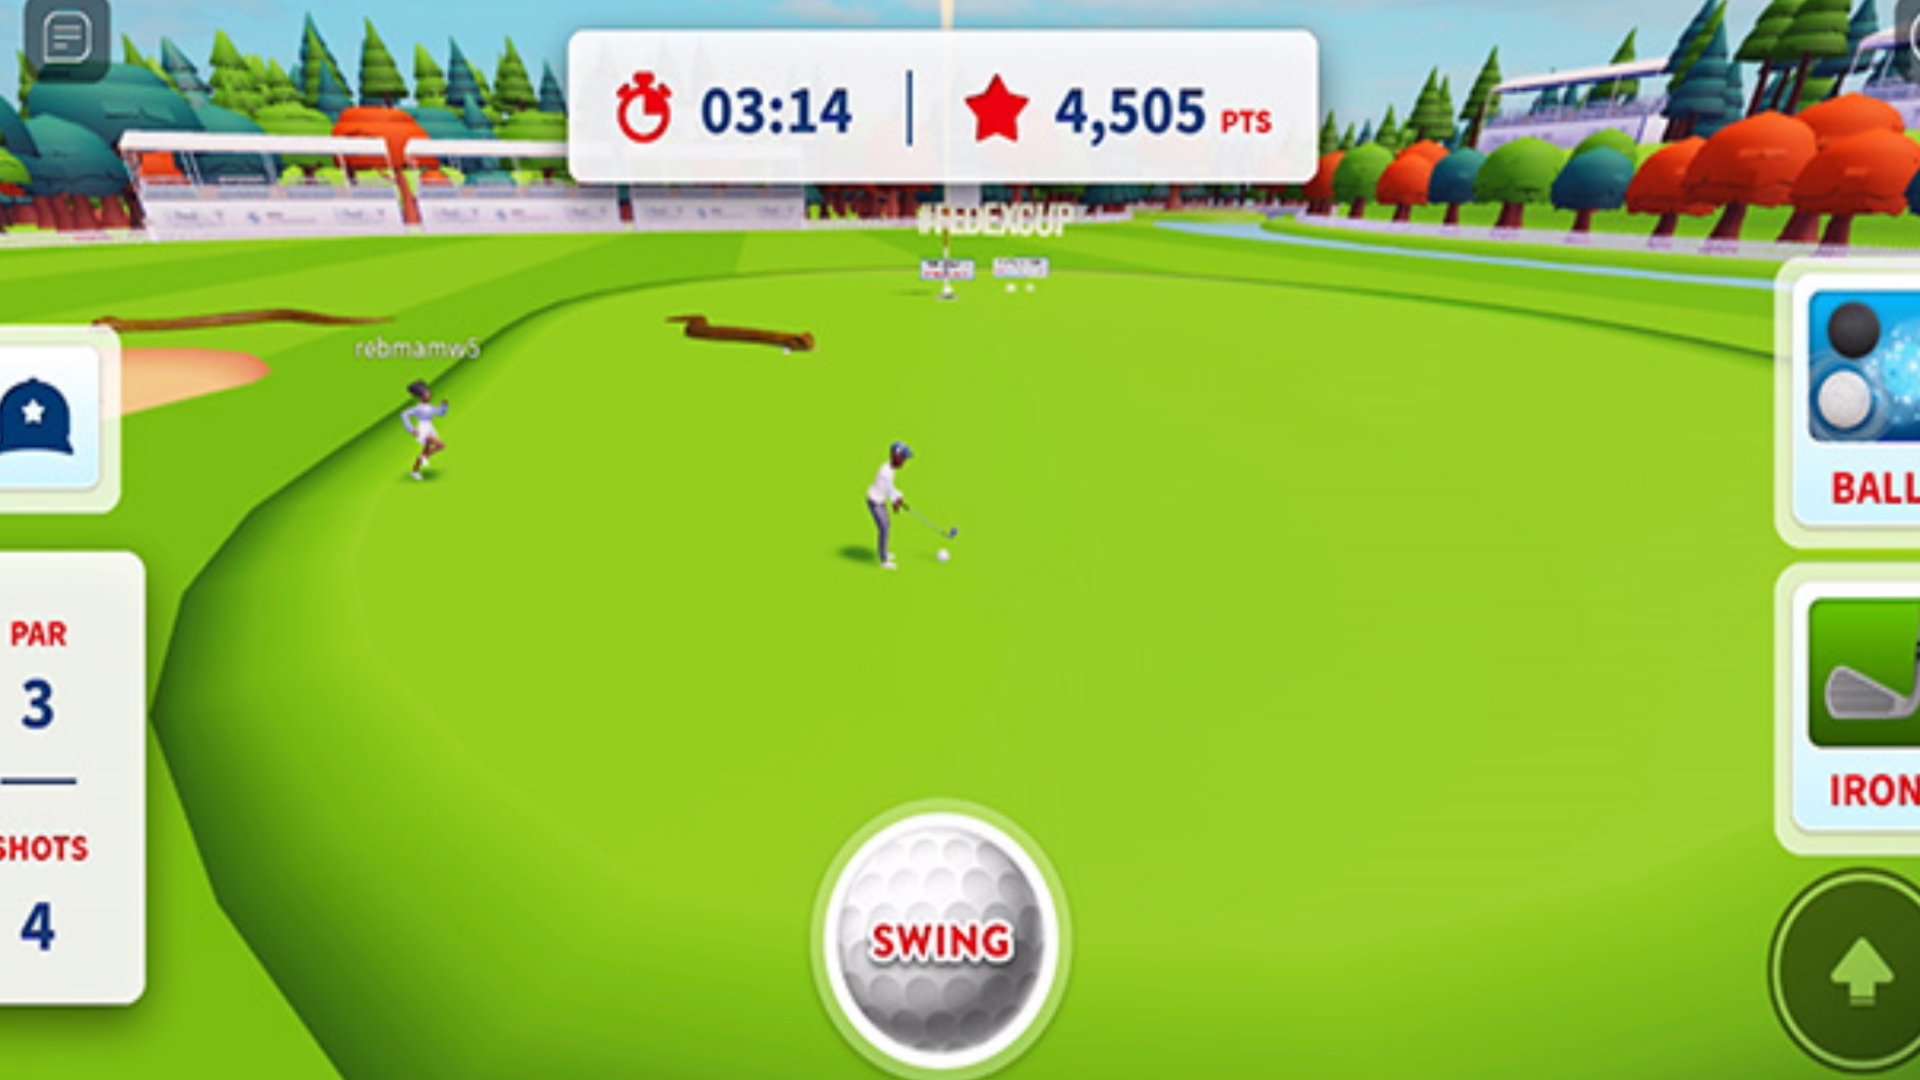 How Trigger XR Integrated Live Data Into PGA TOUR Scramble on Roblox